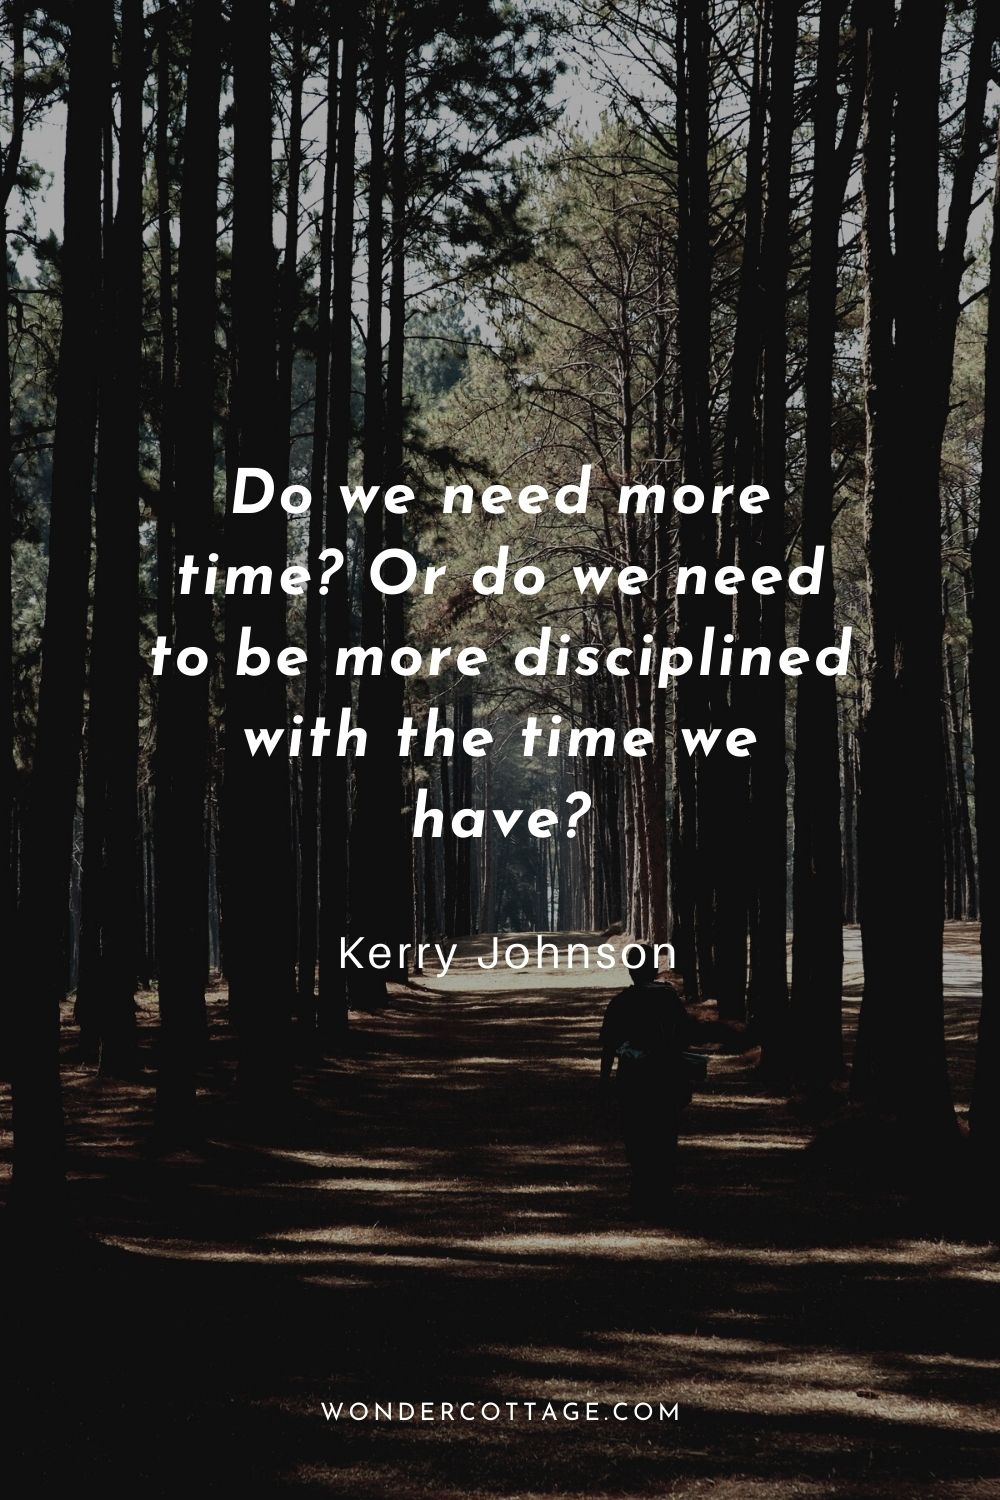 Do we need more time? Or do we need to be more disciplined with the time we have?  Kerry Johnson